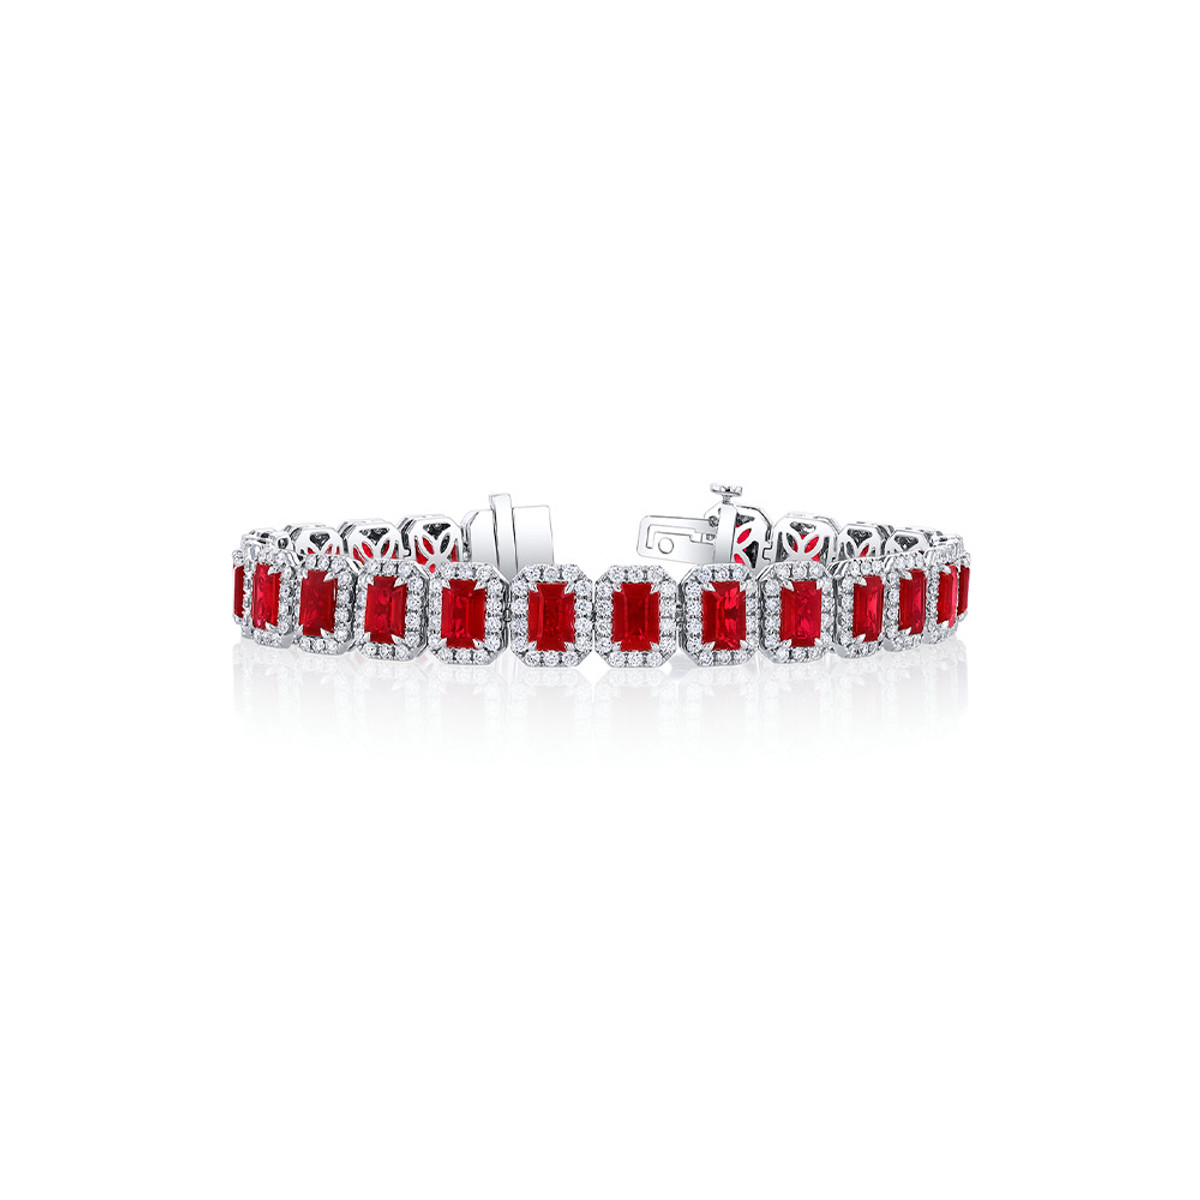 Hyde Park Collection 18K White Gold Ruby and Diamond Line Bracelet-57729 Product Image